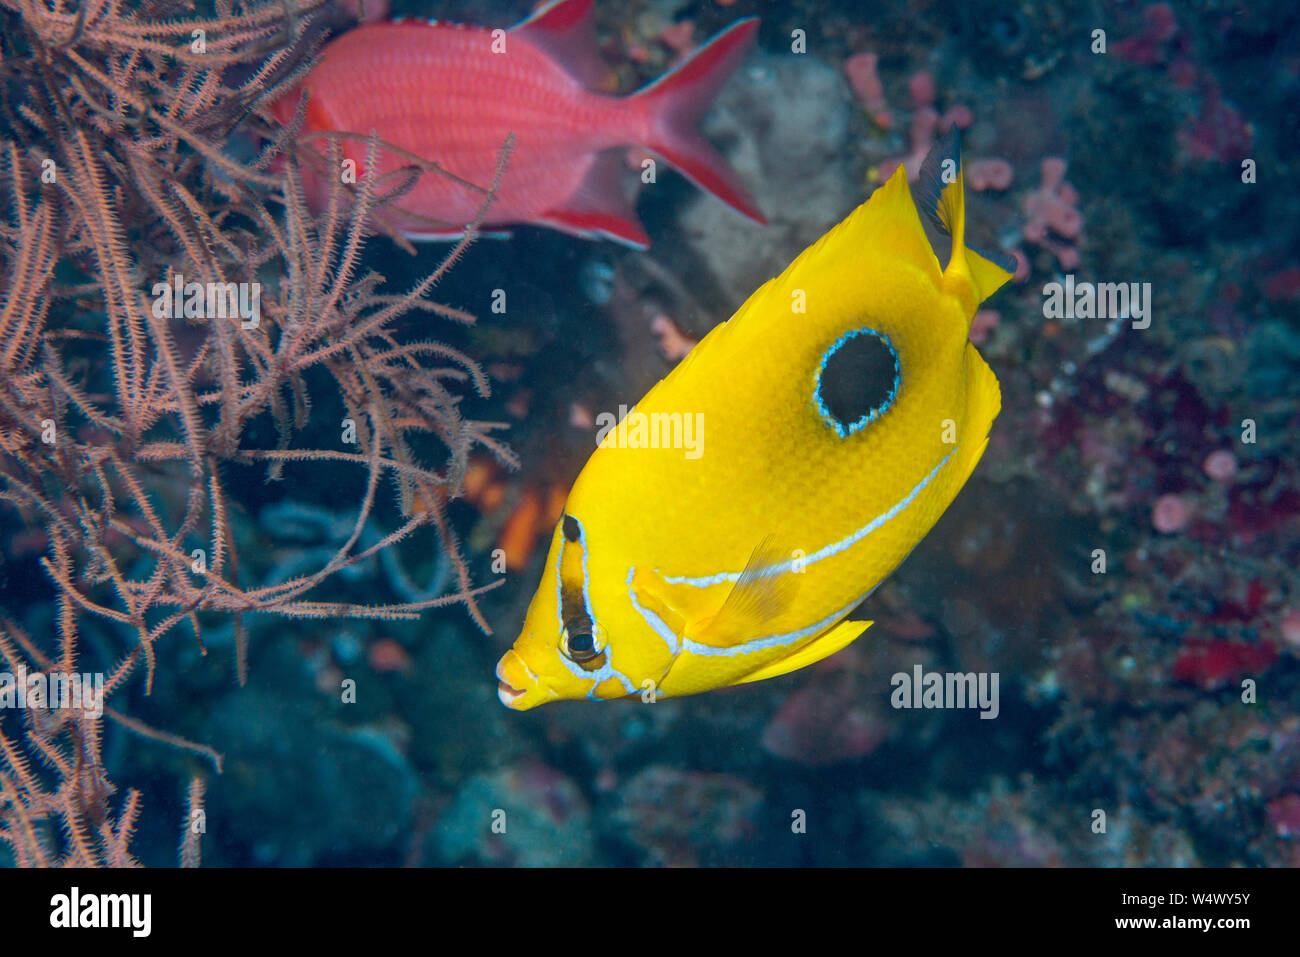 Il Bennett's butterflyfish o Bluelashed butterflyfish [Chaetodon bennetti]. Nord Sulawesi, Indonesia. Foto Stock